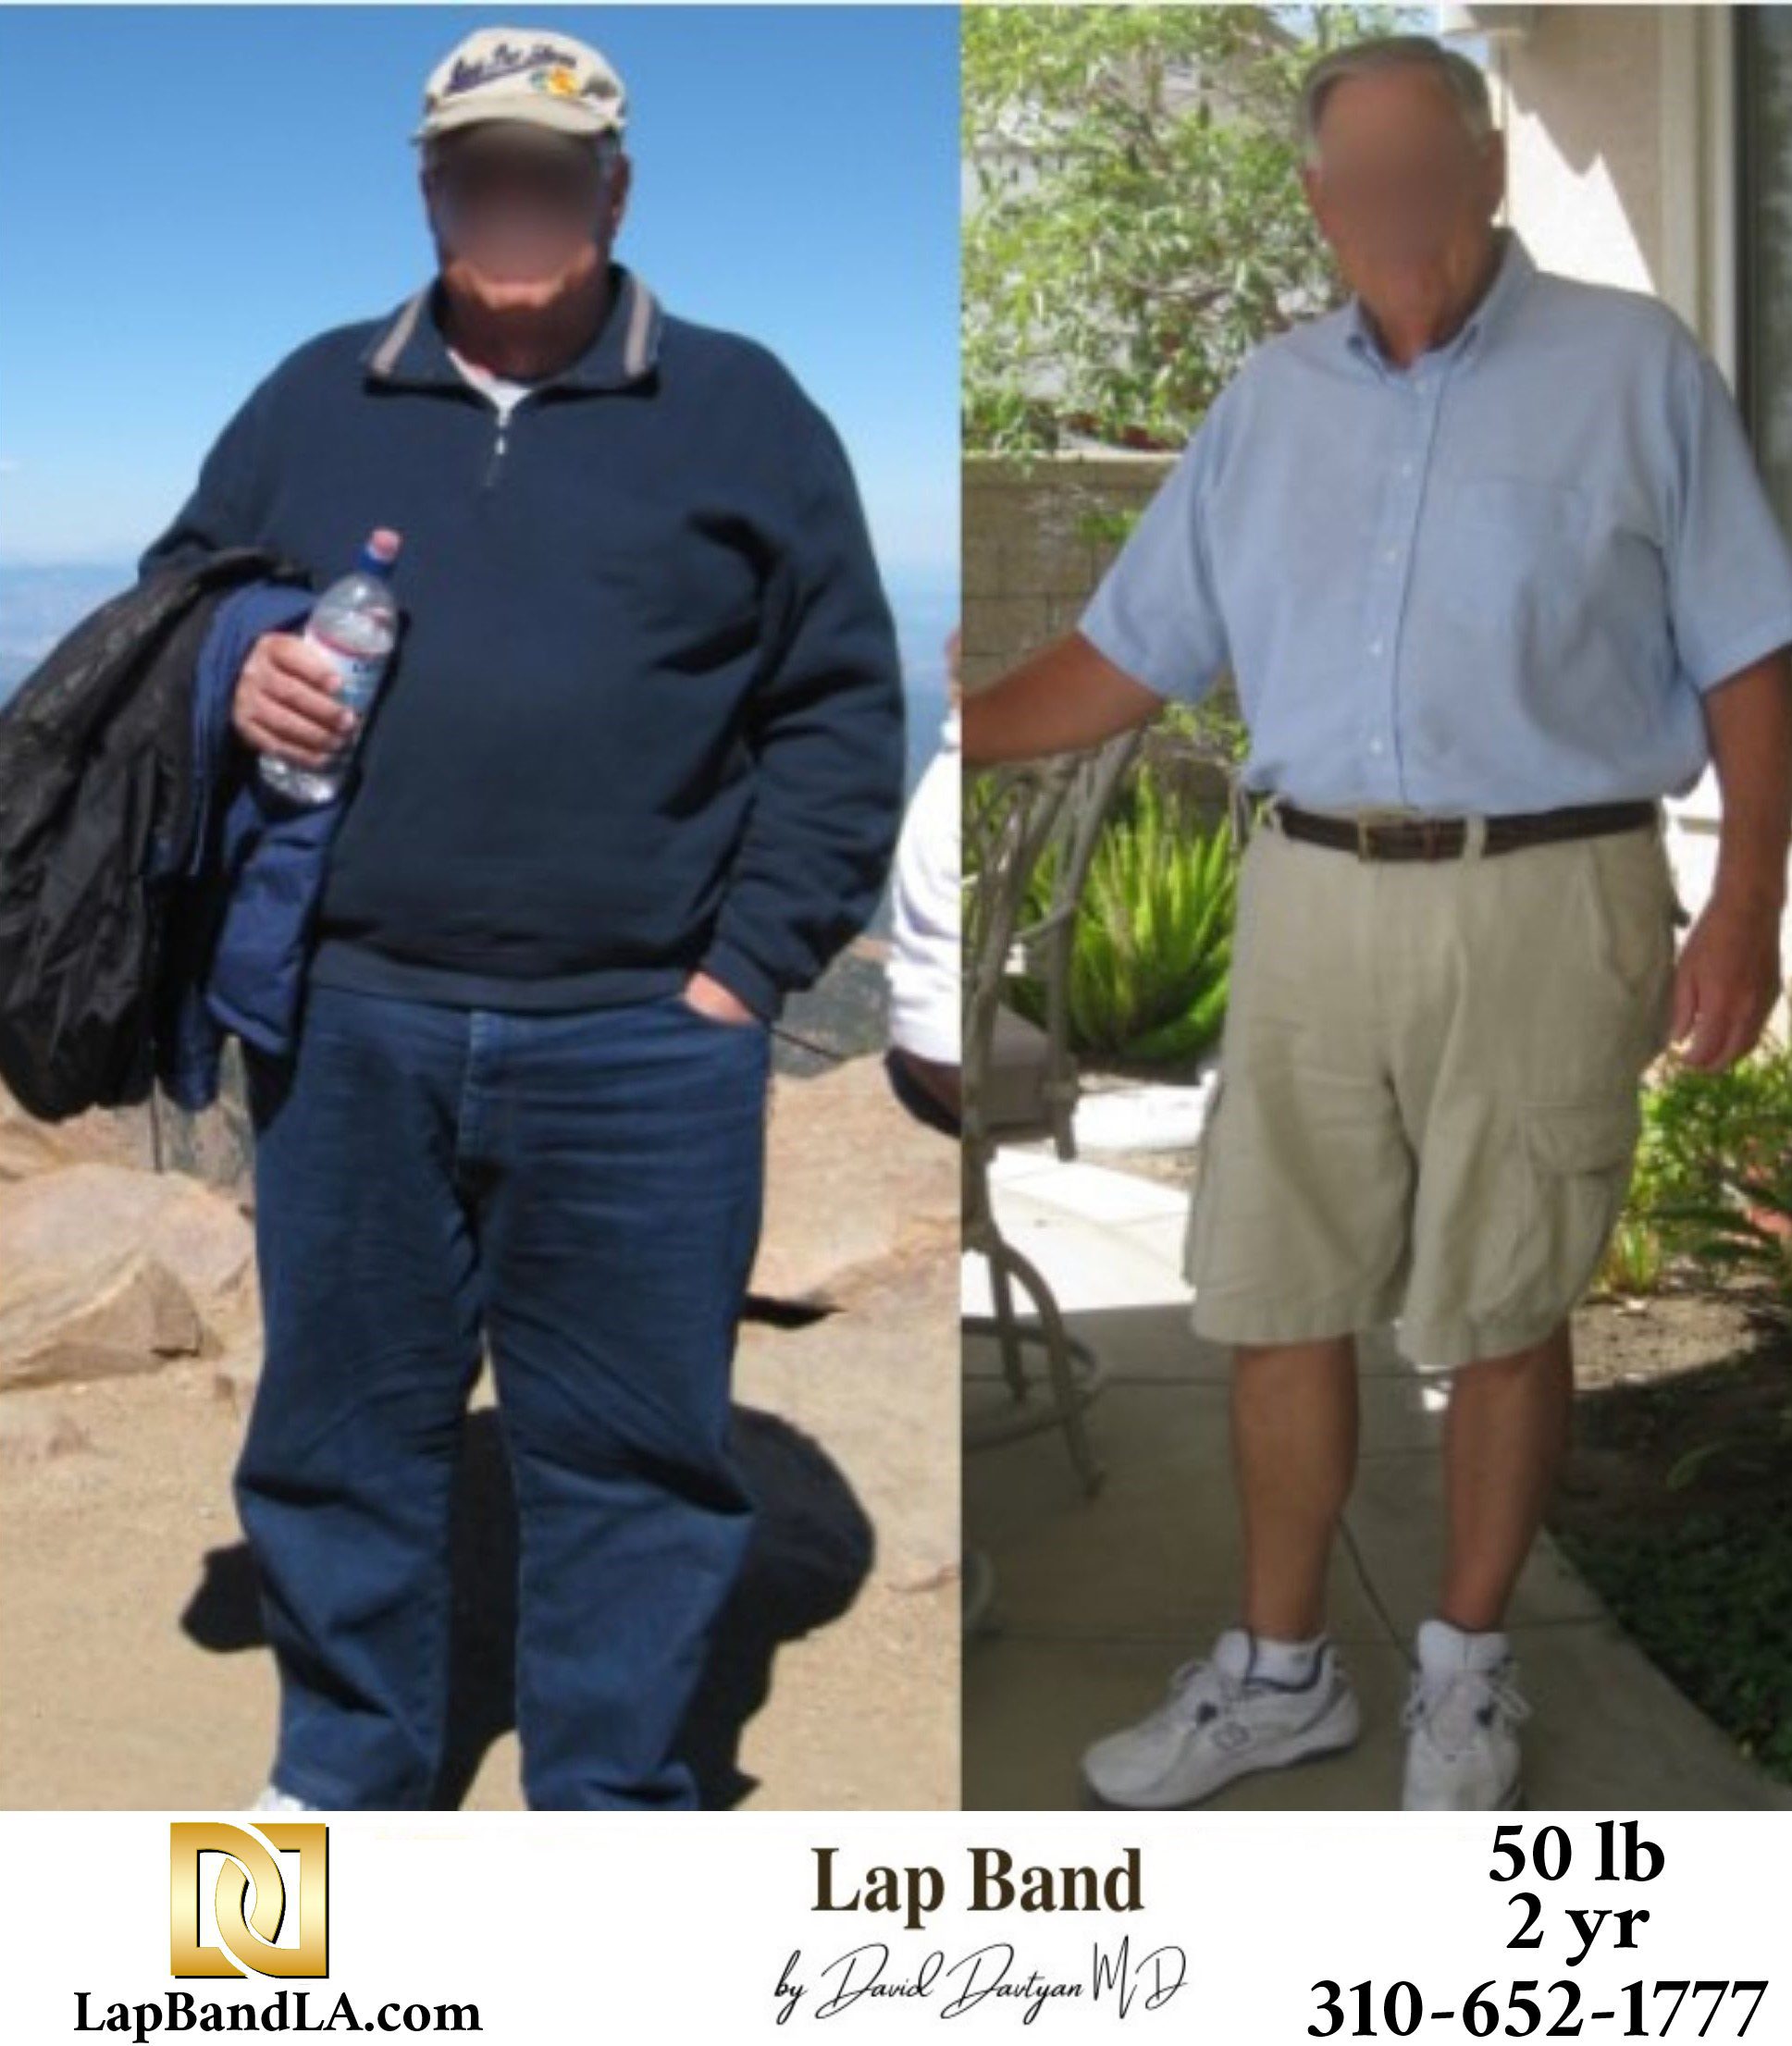 Lowell S. Bariatric Surgery before and after los angeles